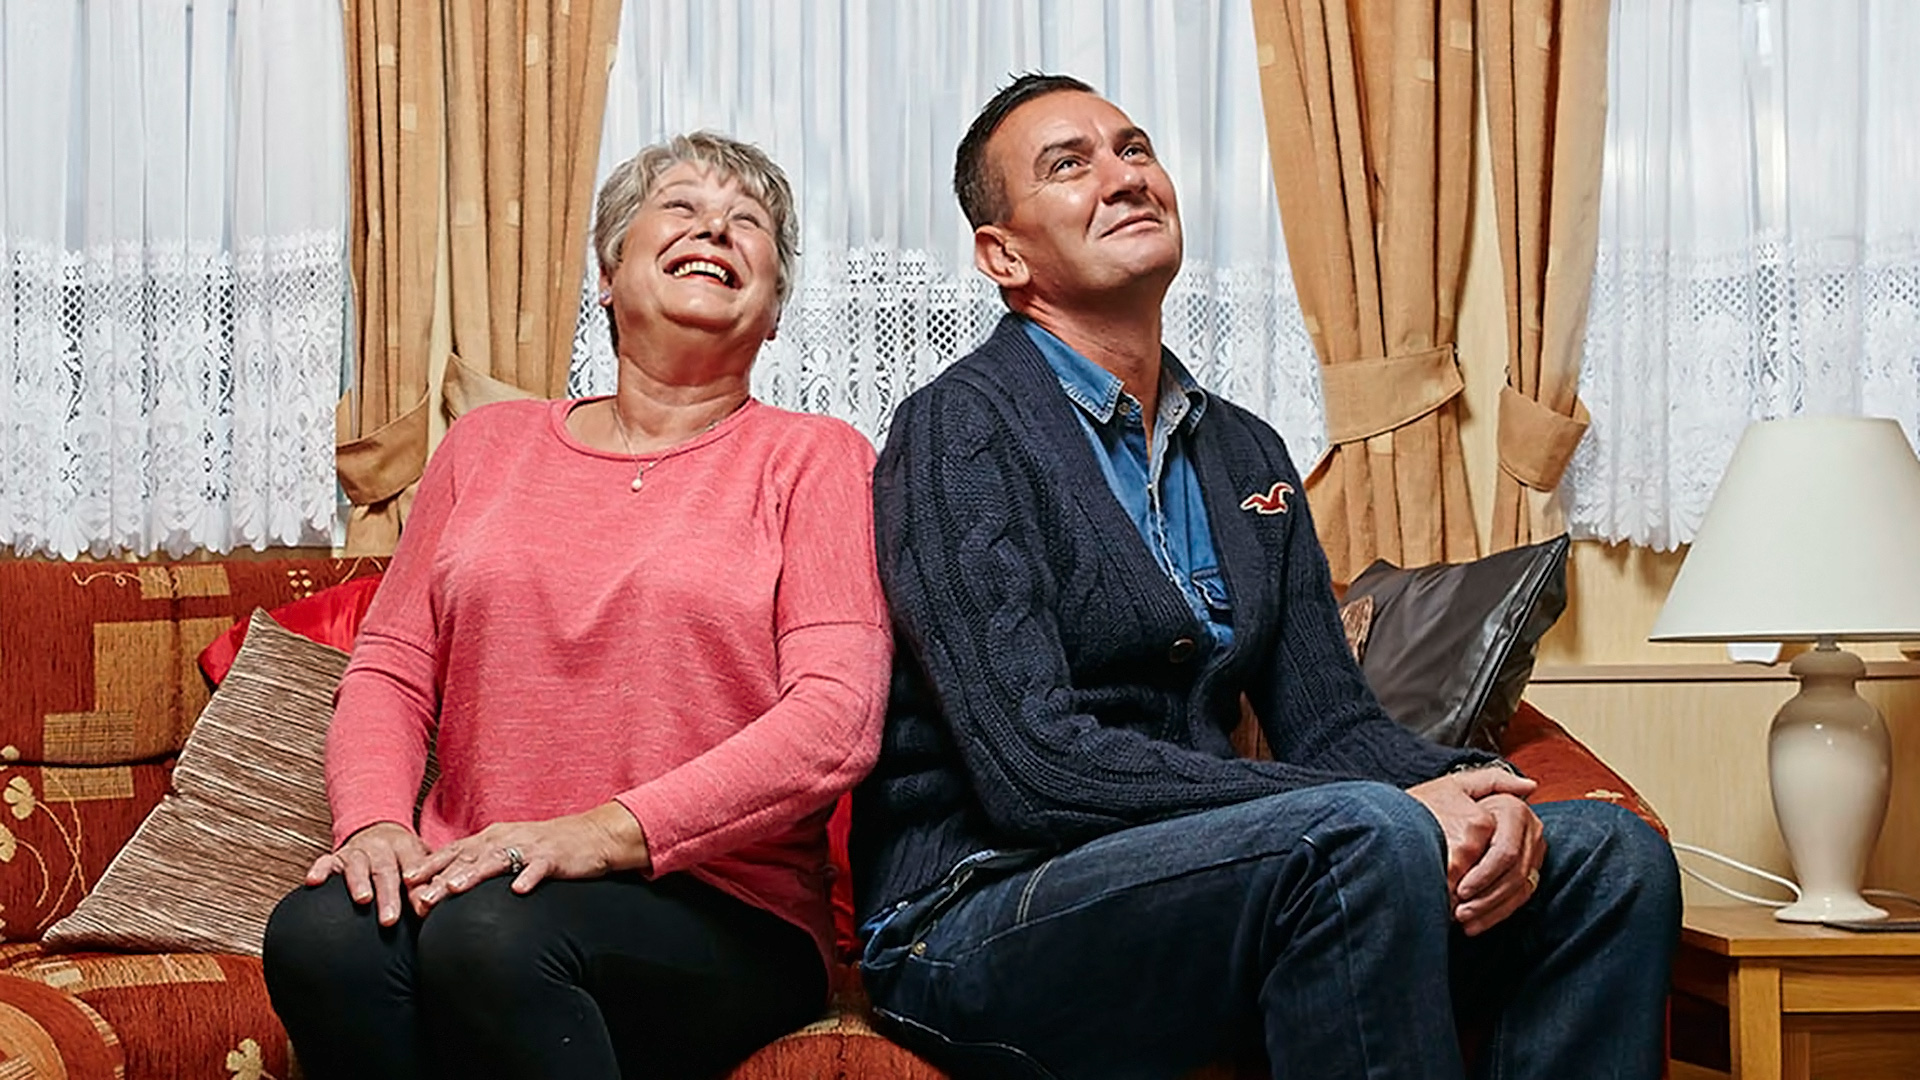 Gogglebox Bosses after Tragic year in search of people who don't want to be on TV!